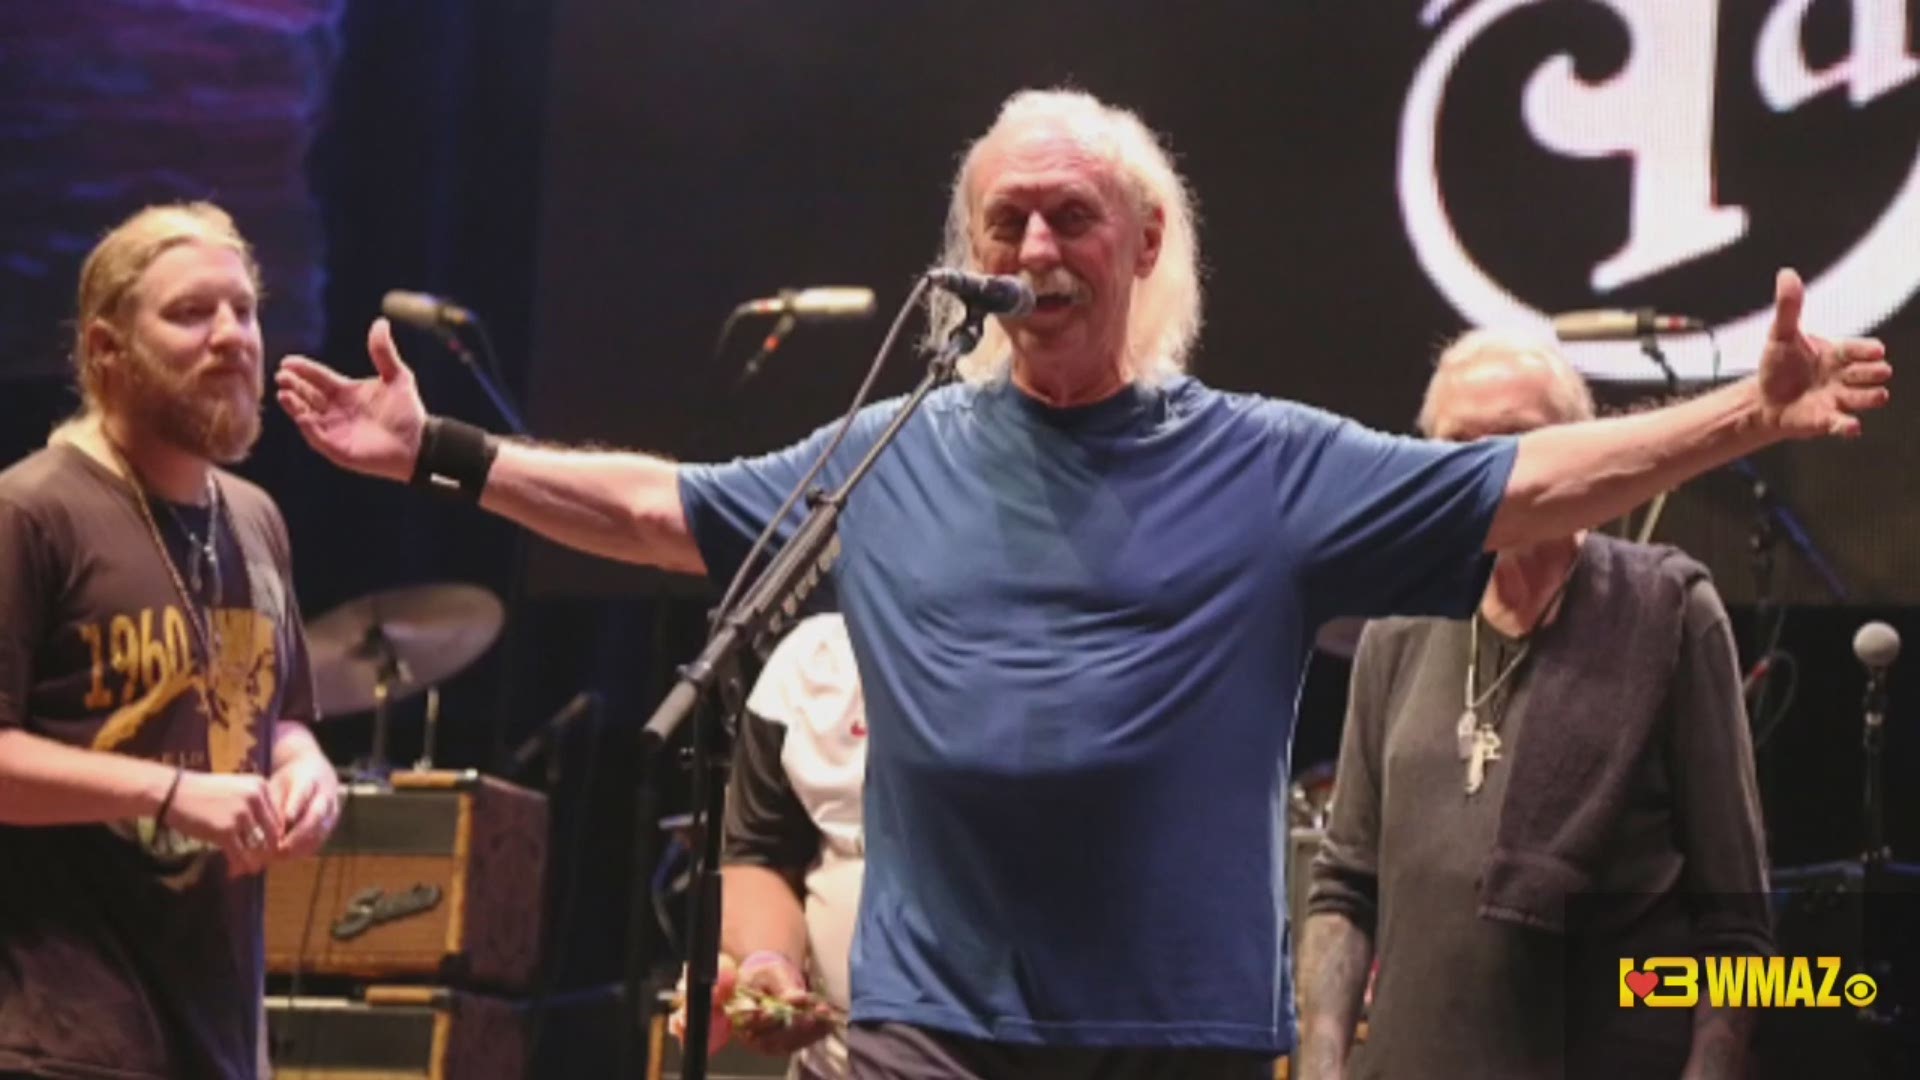 Butch Trucks, drummer and co-founder of the Allman Brothers Band died Tuesday at 69.